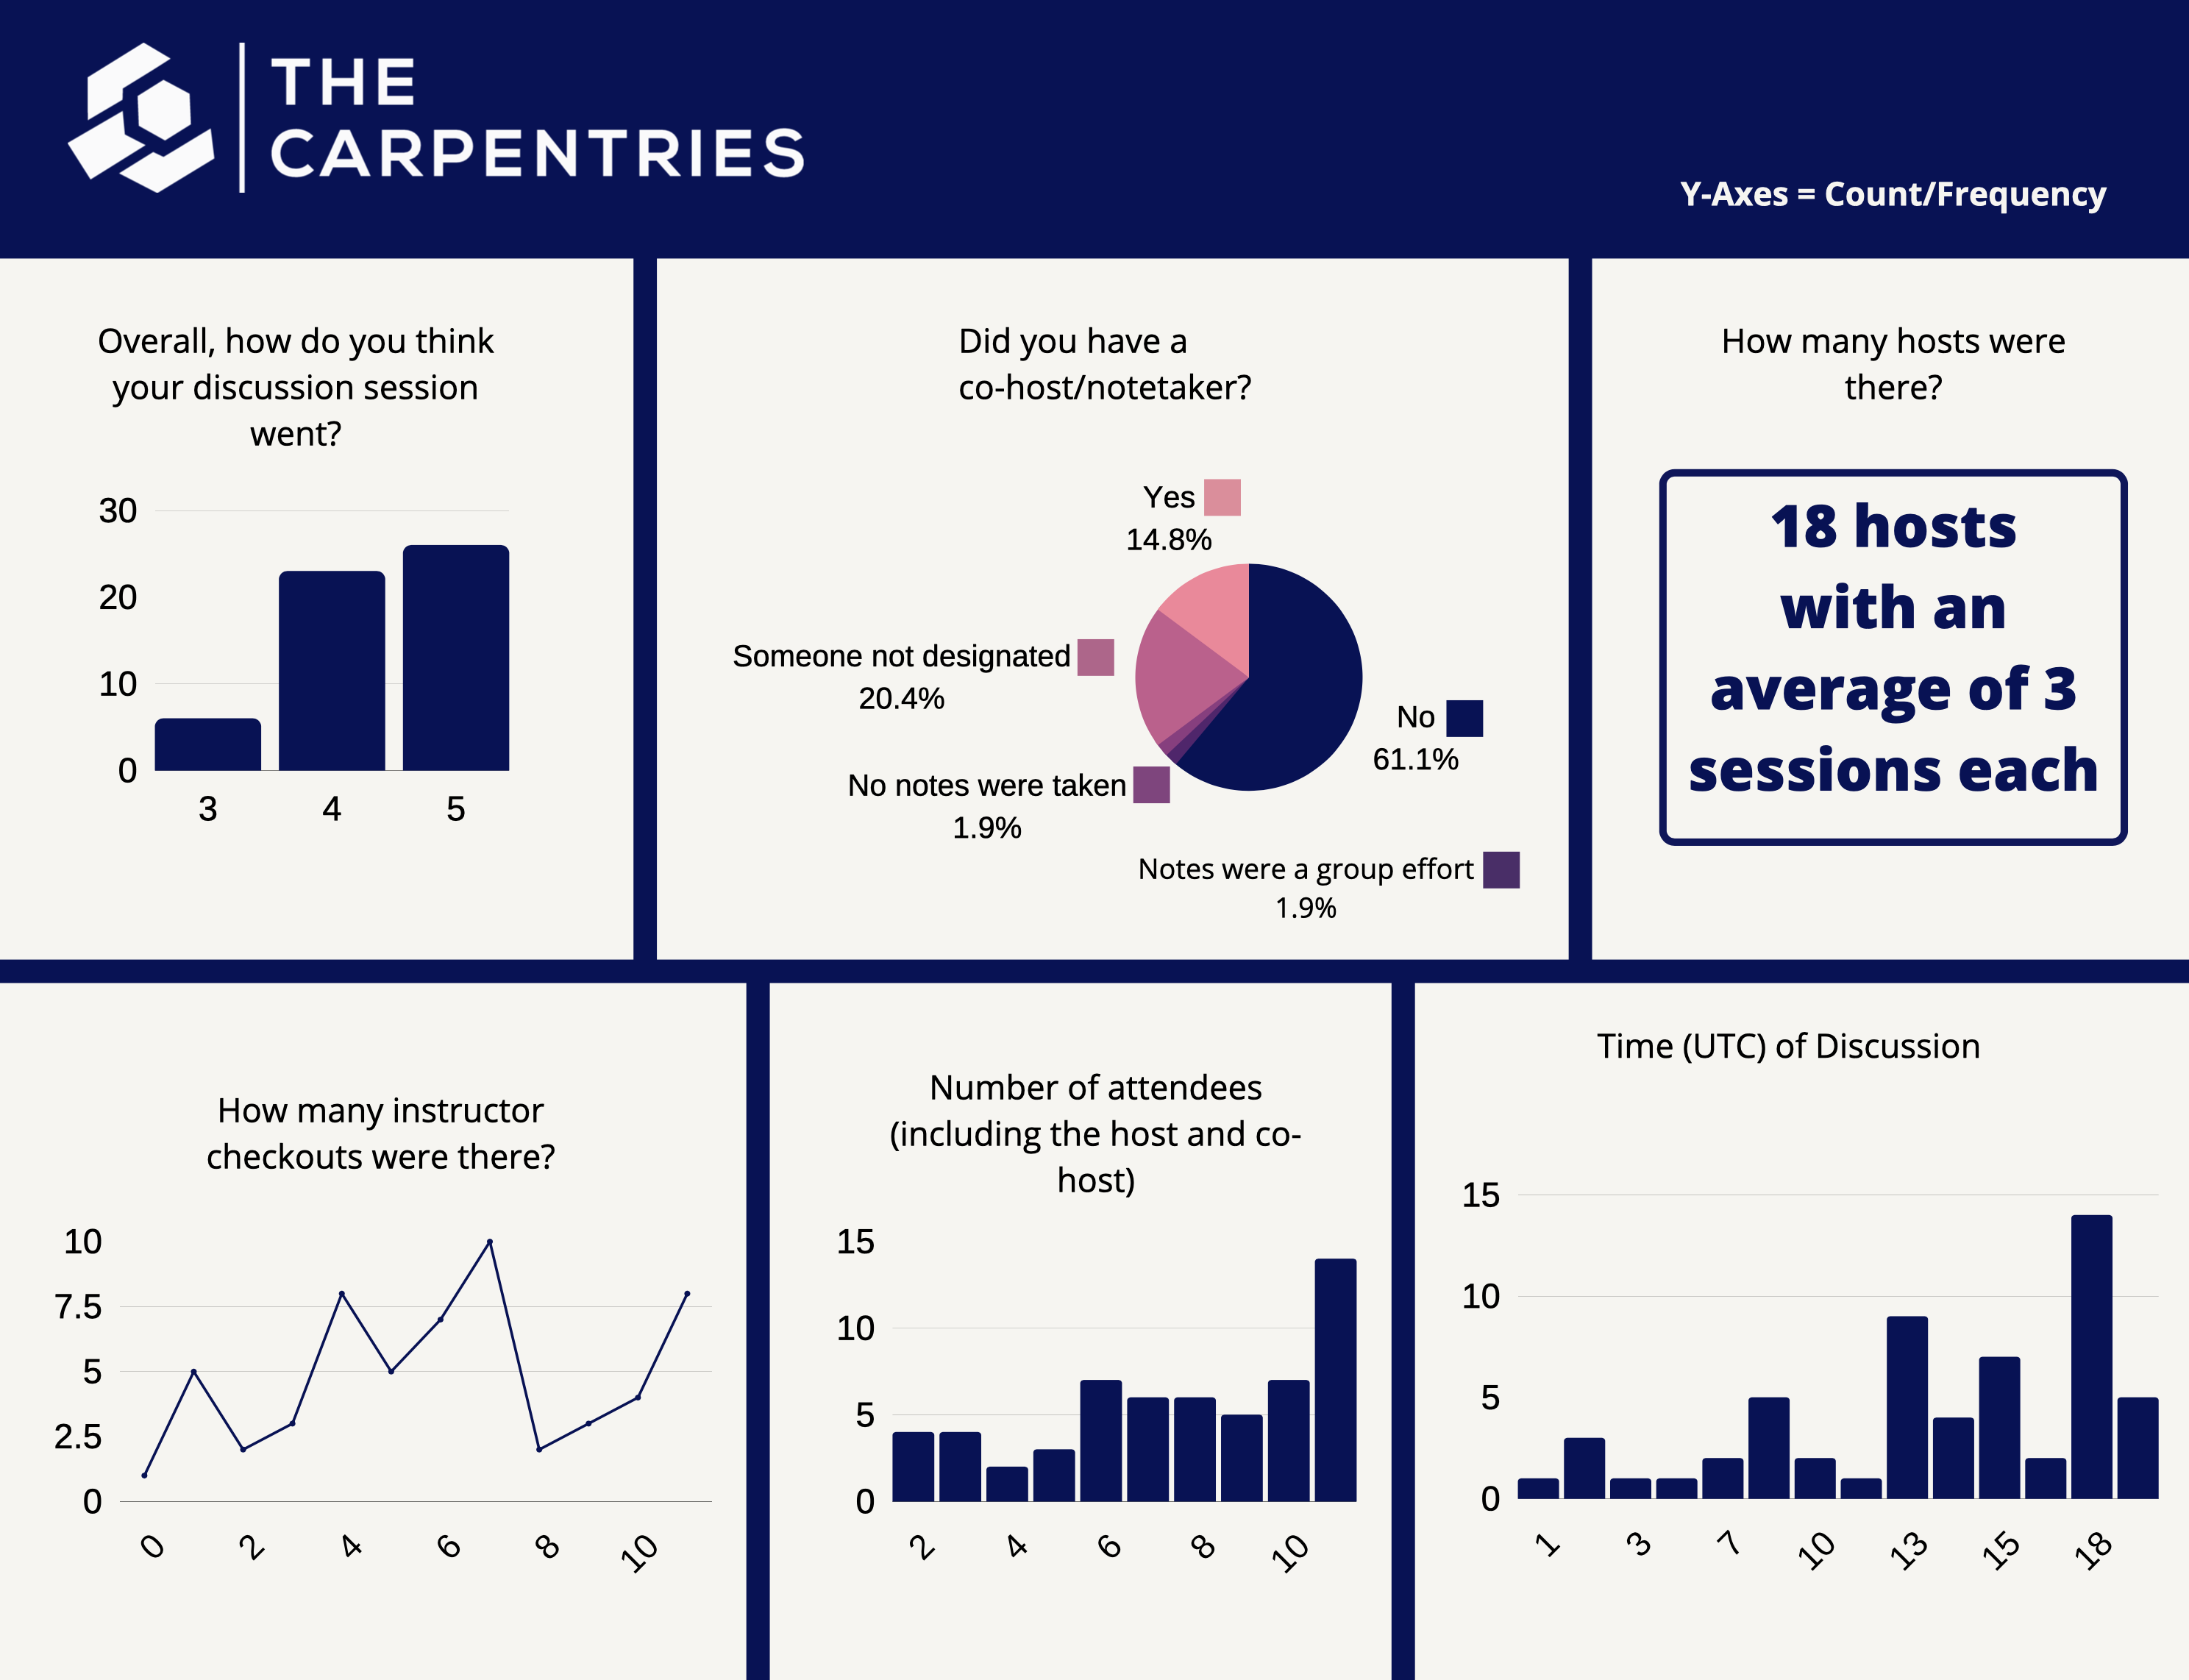 Information on pre- and post-workshops discussions held in The Carpentries over the last six months